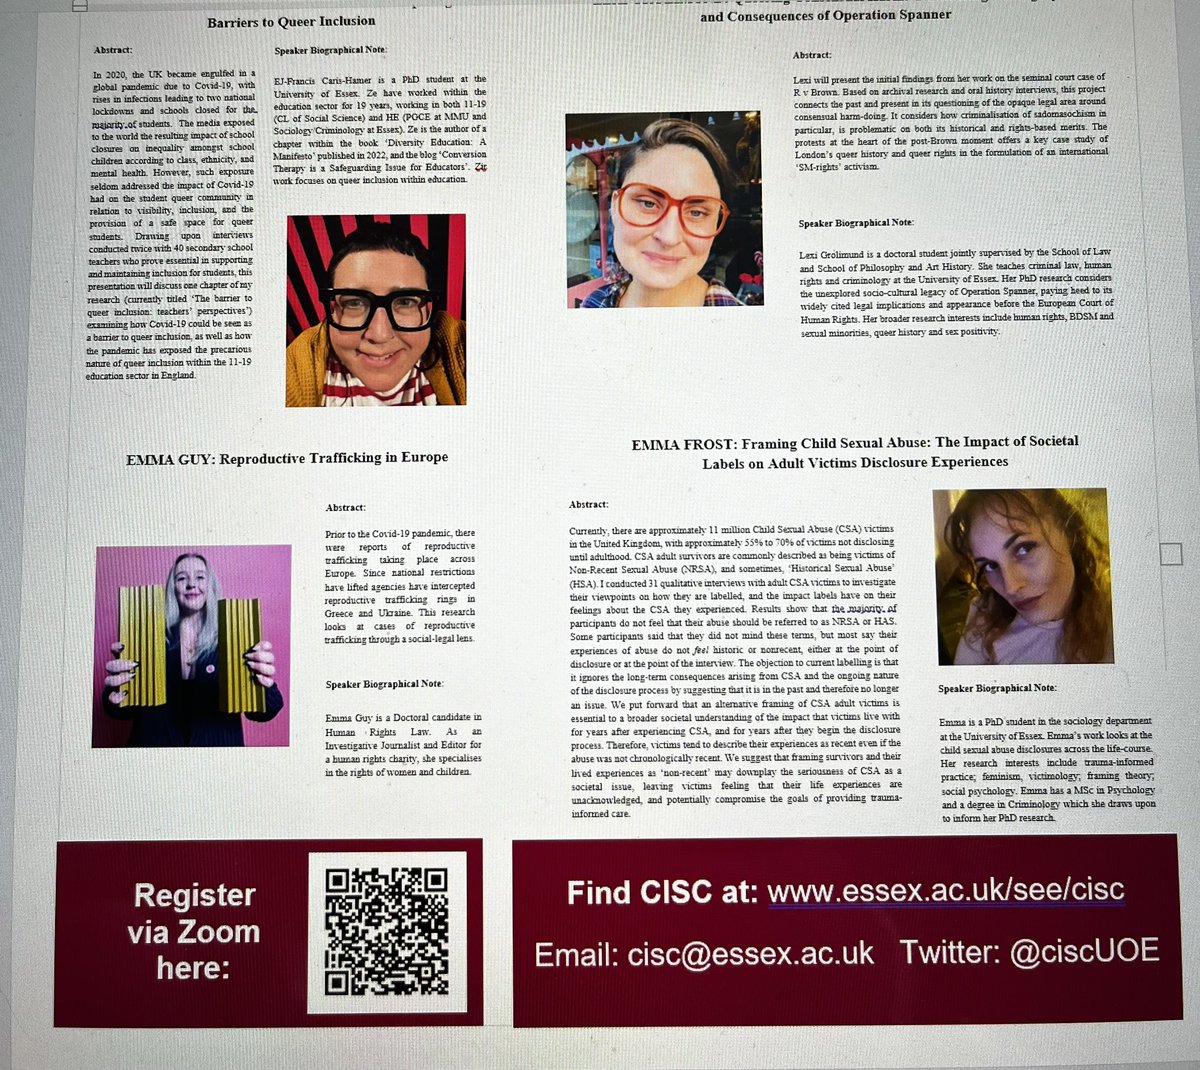 Come and listen to PhD students about their research as part of @ciscUoE seminar series. Use QR code to register and some fab speakers @Emma111189 @EssexPostgrads @essexsociology @EssexSocSci